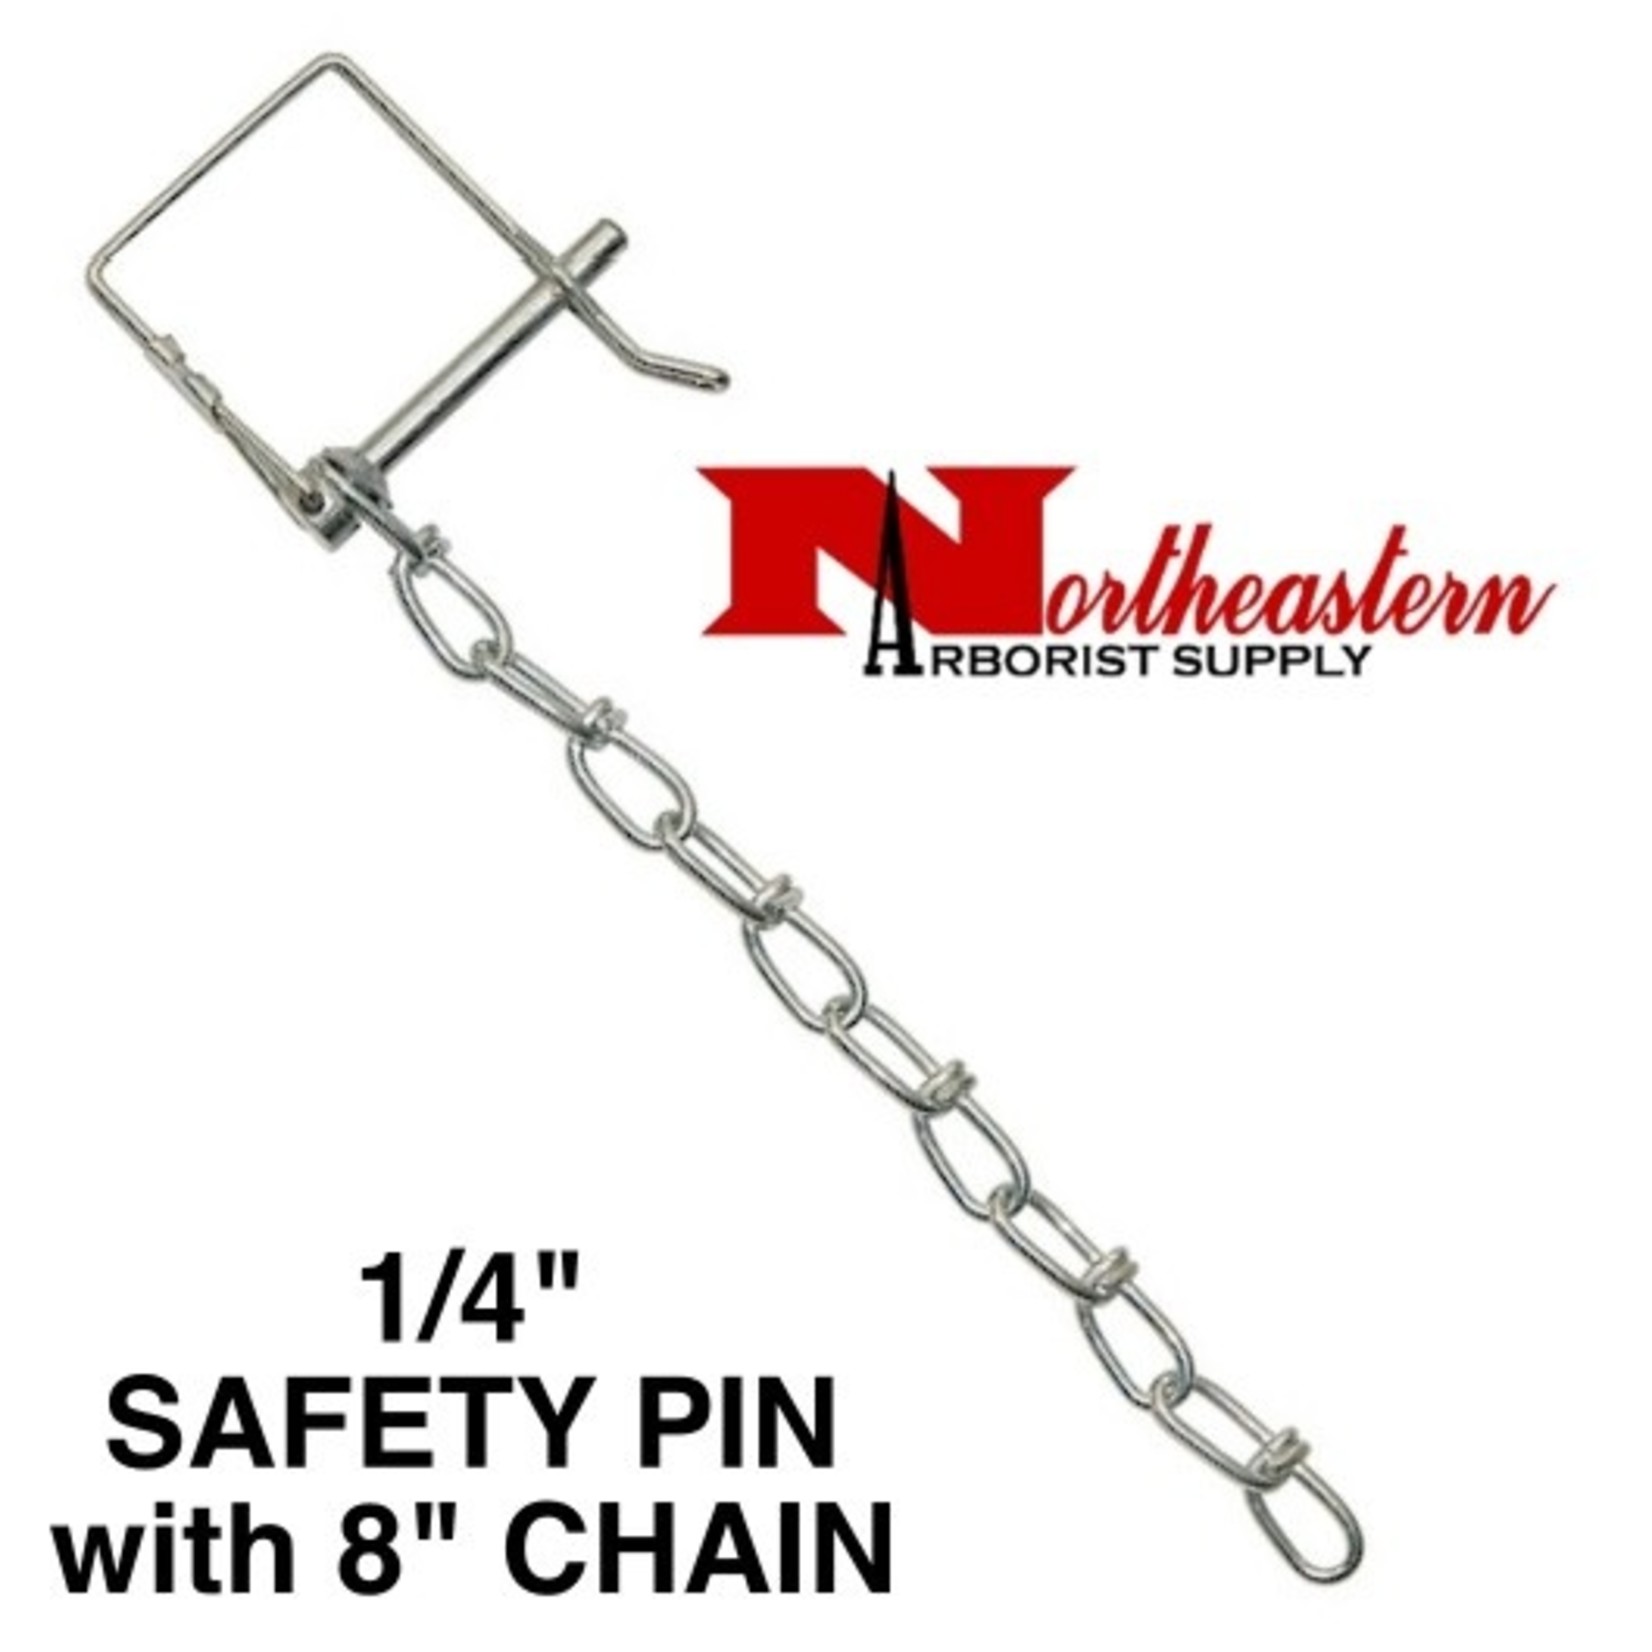 Buyers Pin & Chain For Hitch 1/4" Diameter (Safety Pin Clip With 8" Chain Installed)